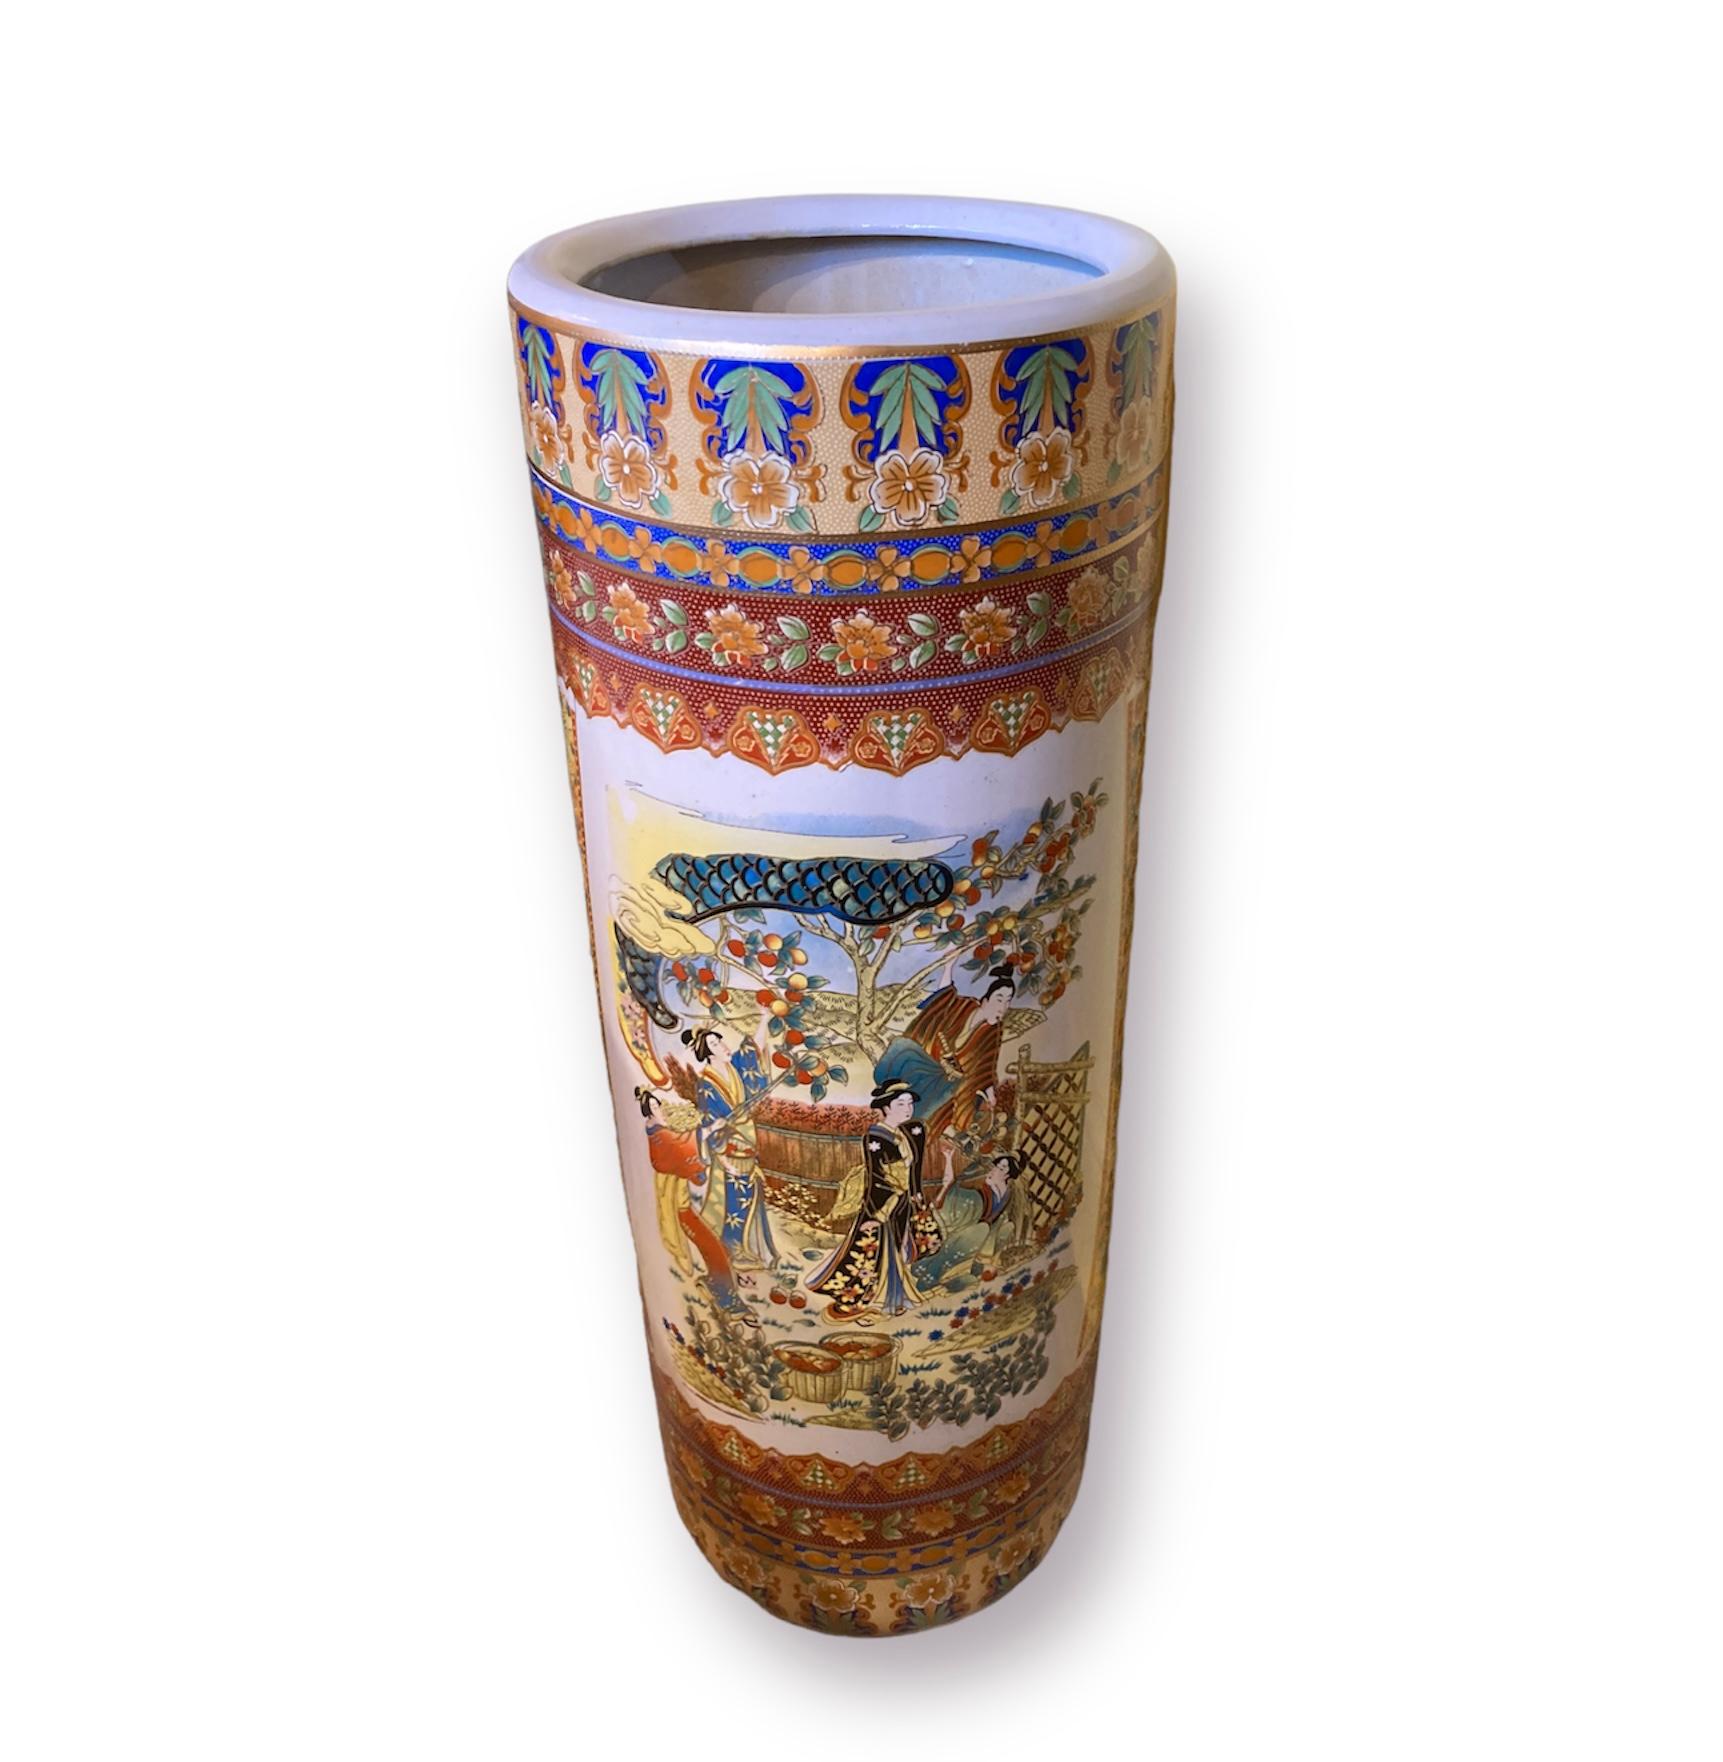 A beautiful oriental Satsuma stick and umbrella stand. Decorated all the way around depicting an elegant garden scene in rich oranges and blues.